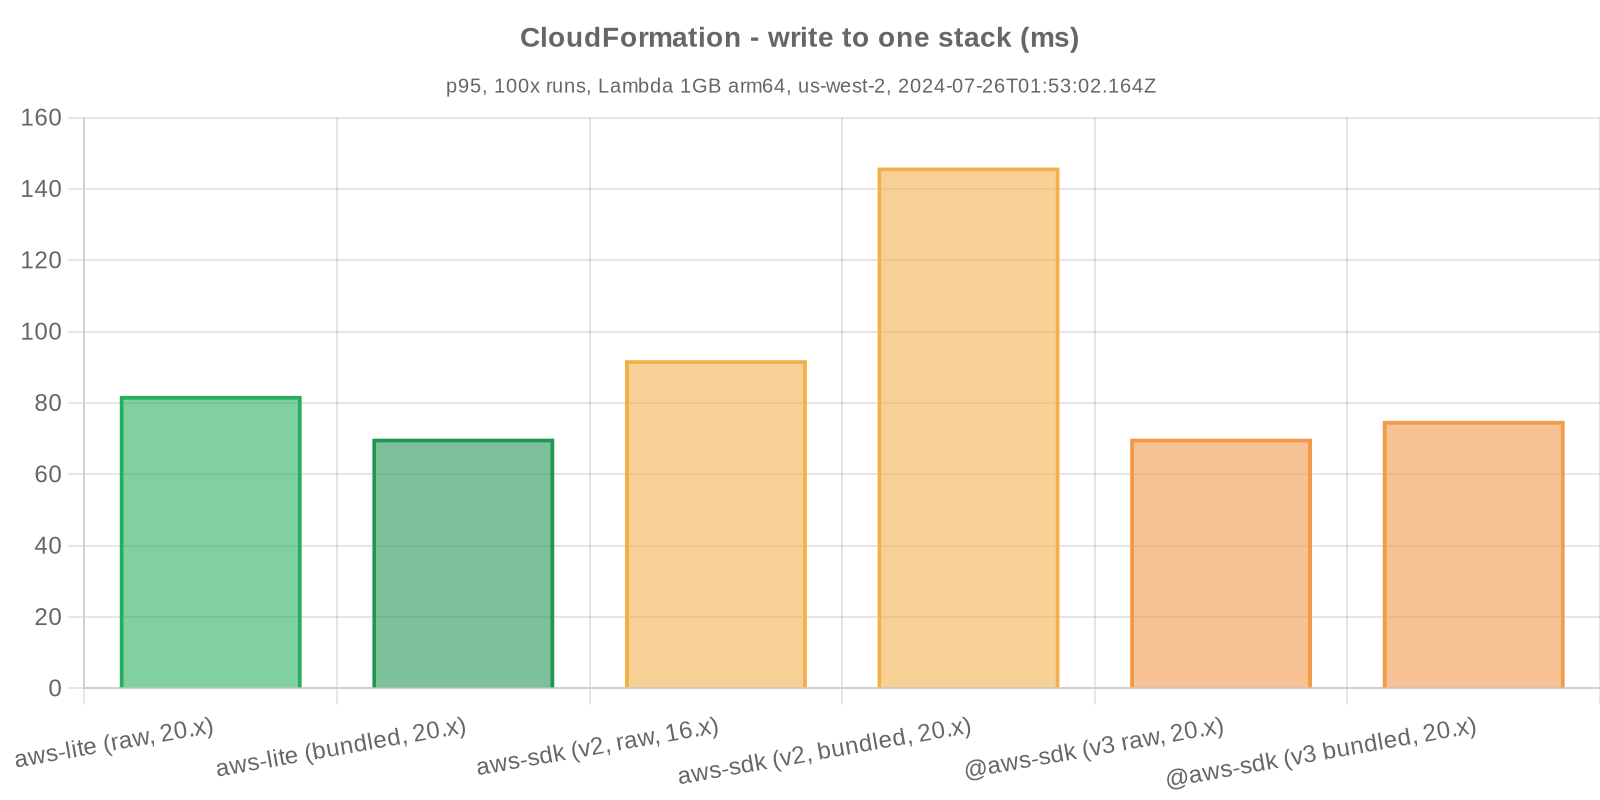 Benchmark statistics - CloudFormation - write one stack